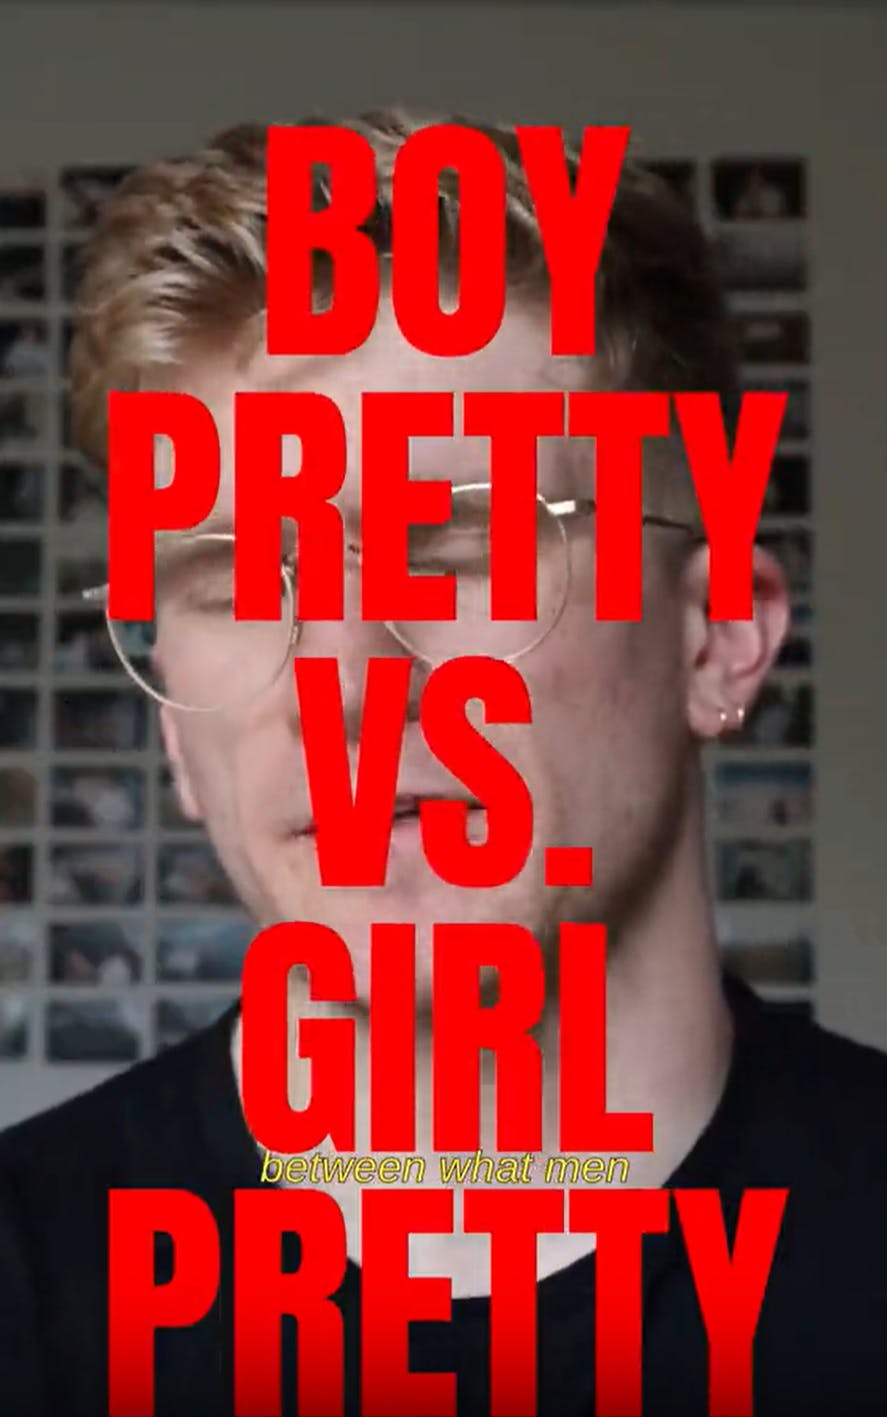 Screenshot of a TikTok with a blond man in the background, with 'BOY PRETTY VS. GIRL PRETTY' in huge font covering the screen.